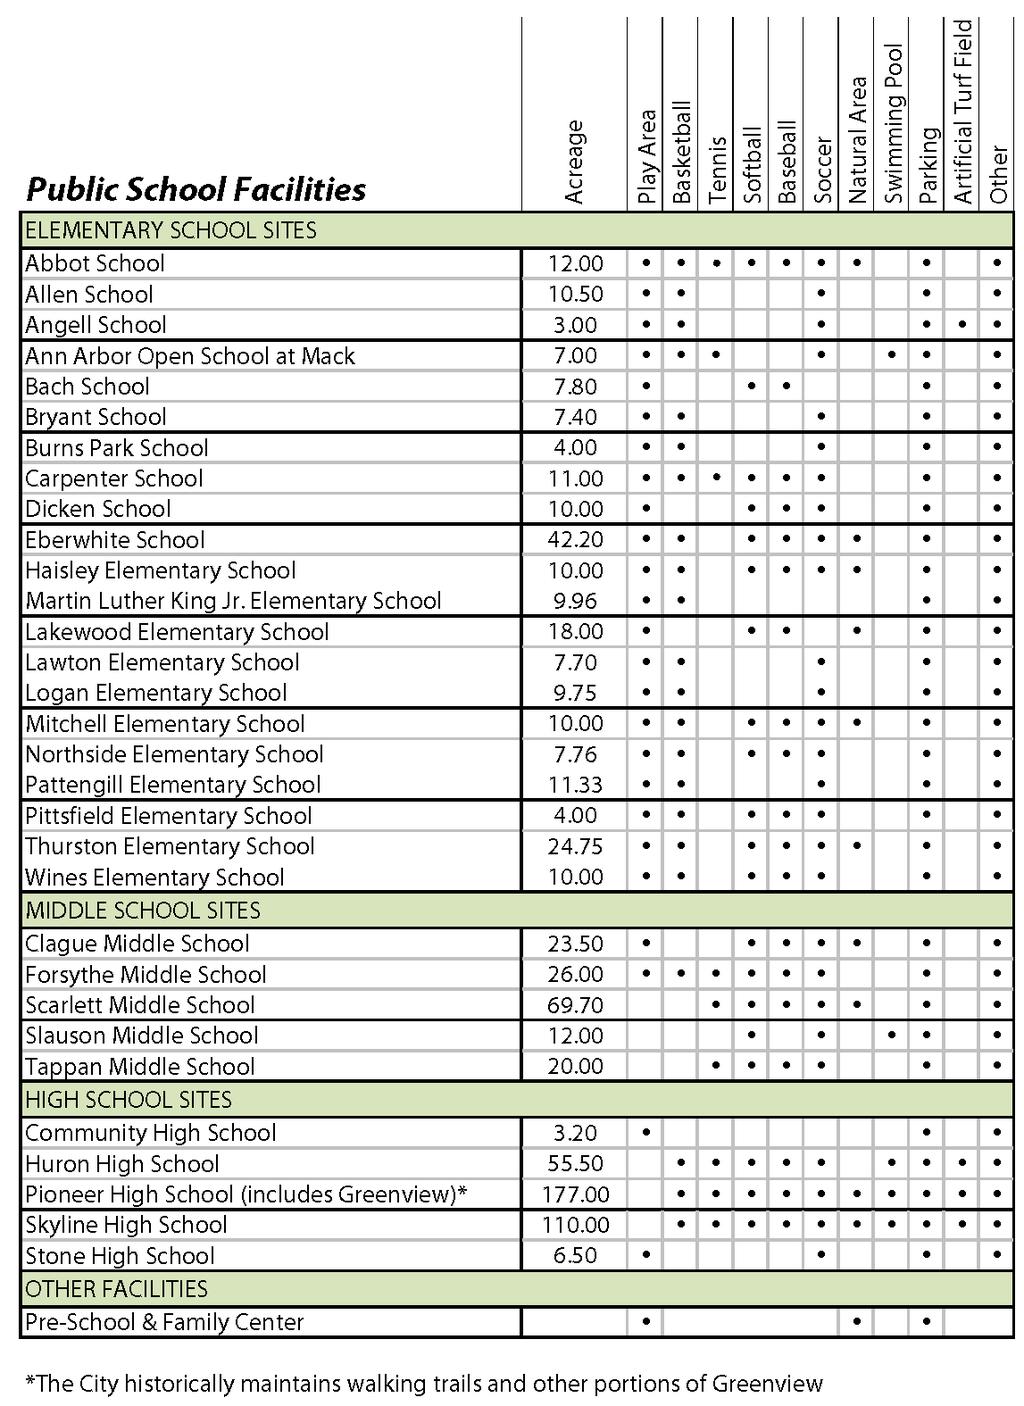 SECTION IV: Inventory of the Park, Recreation and Open Space System F. Ann Arbor Public Schools Inventory The Ann Arbor Public Schools have 32 sites, including elementary, middle, and high schools.